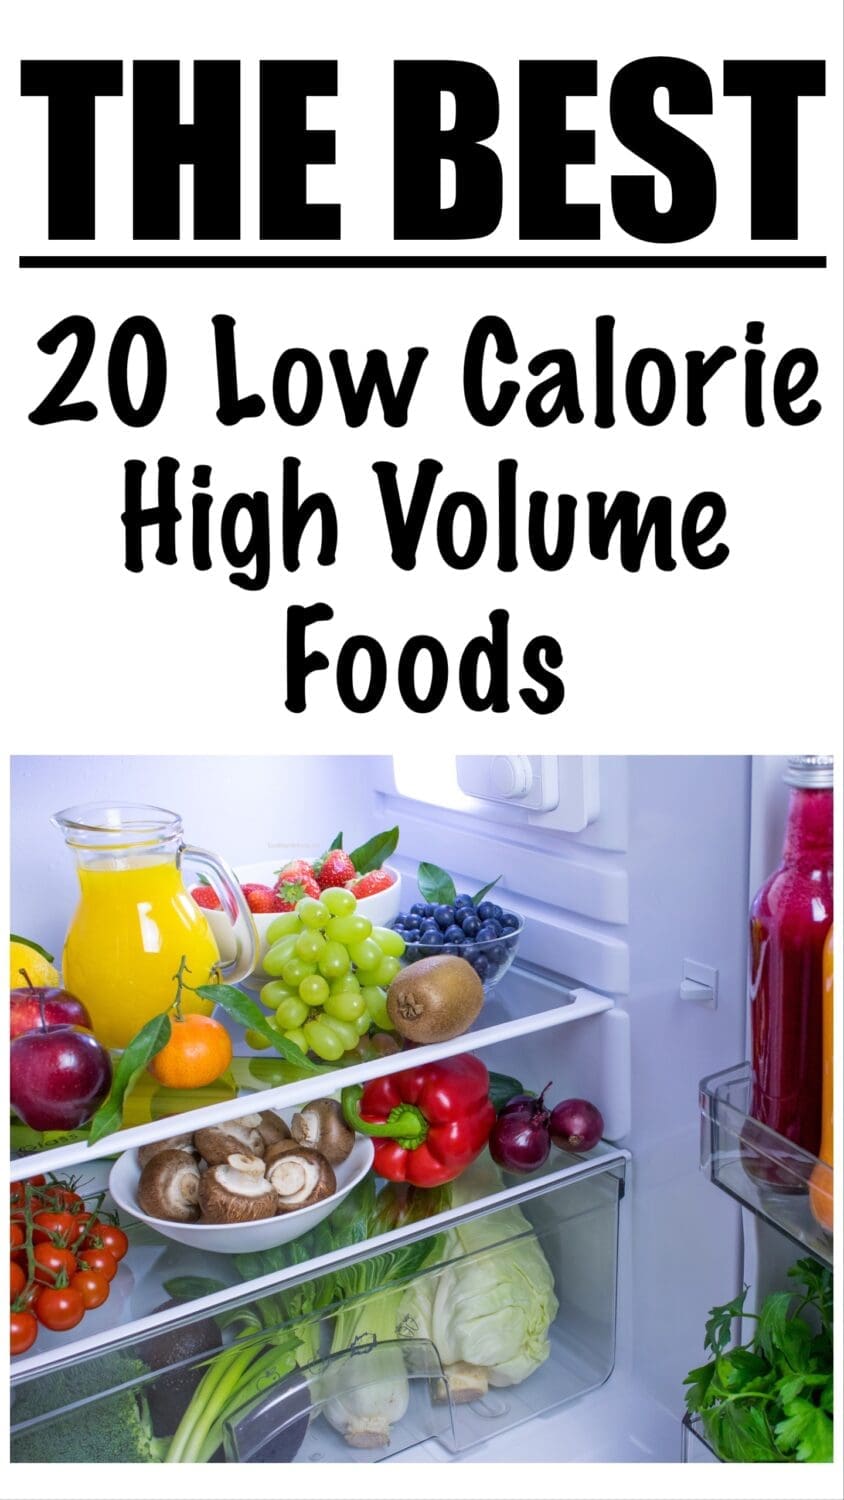 20 Low Calorie High Volume Foods